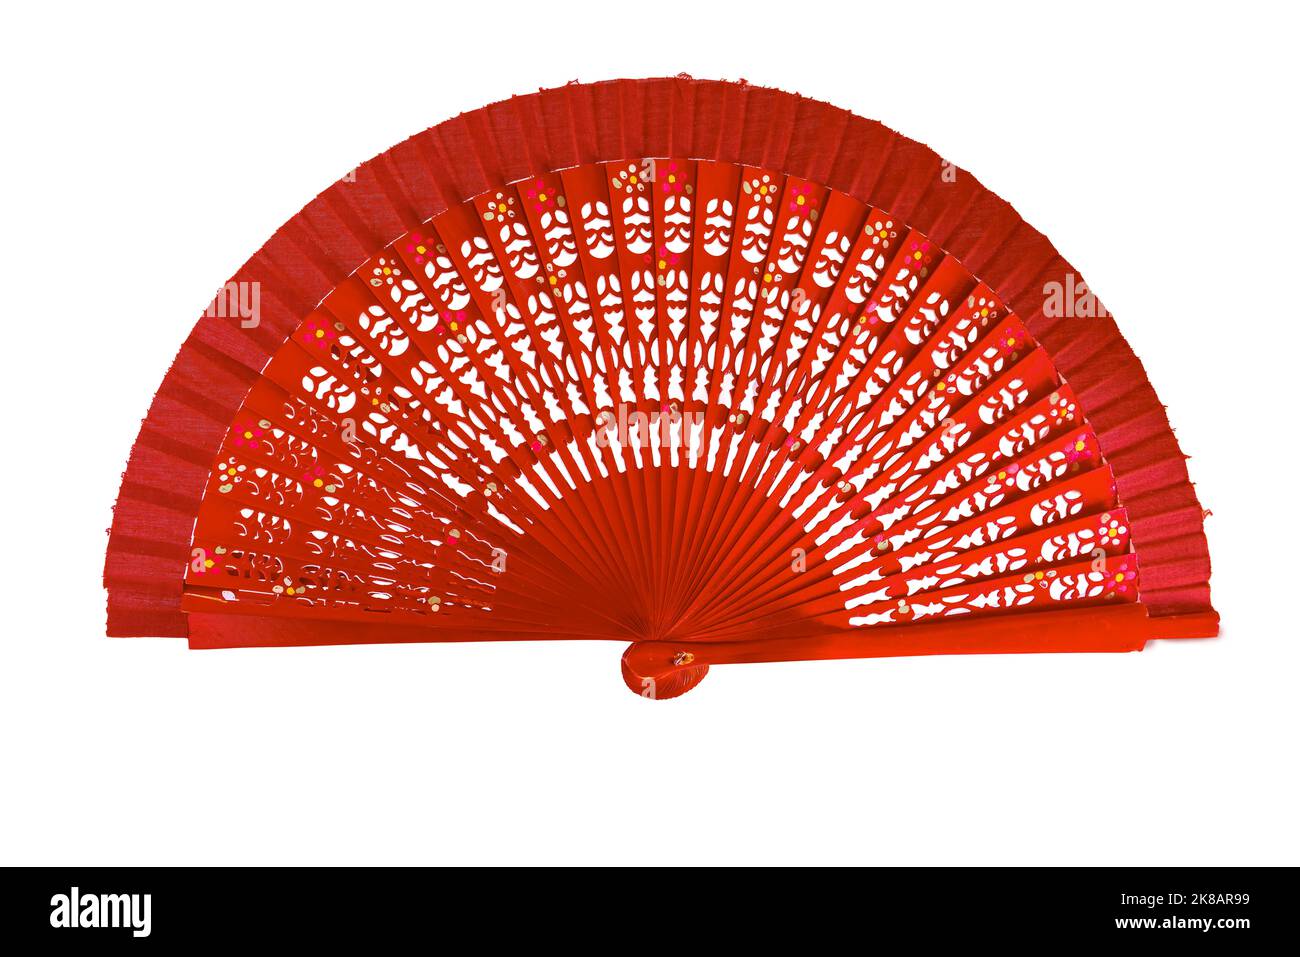 Spanish red open hand fan, decorated with floral motifs, isolated on white background Stock Photo